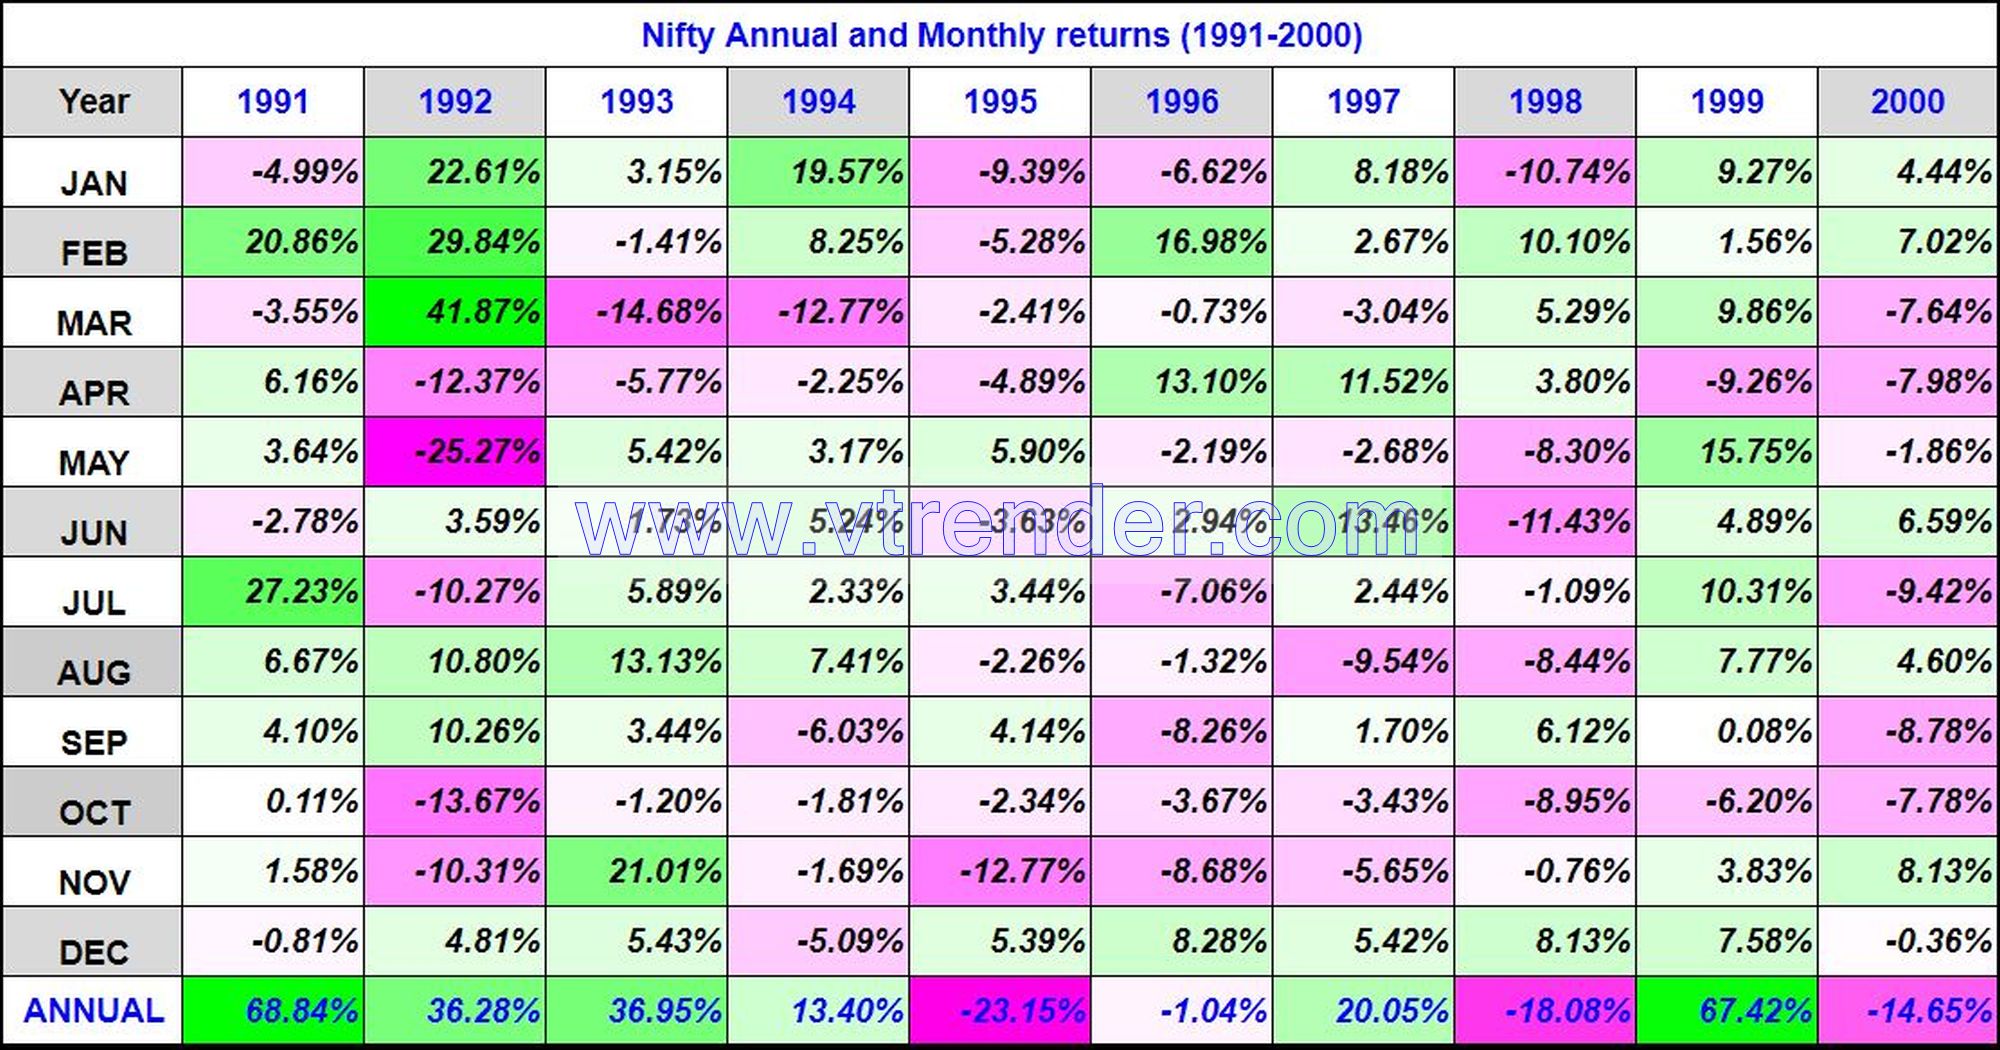 Niftyreturns1991 2000 Nifty 50 Monthly And Annual Returns (1991-2022) Updated 30Th Nov 2022 Annual, Monthly, Nifty Returns